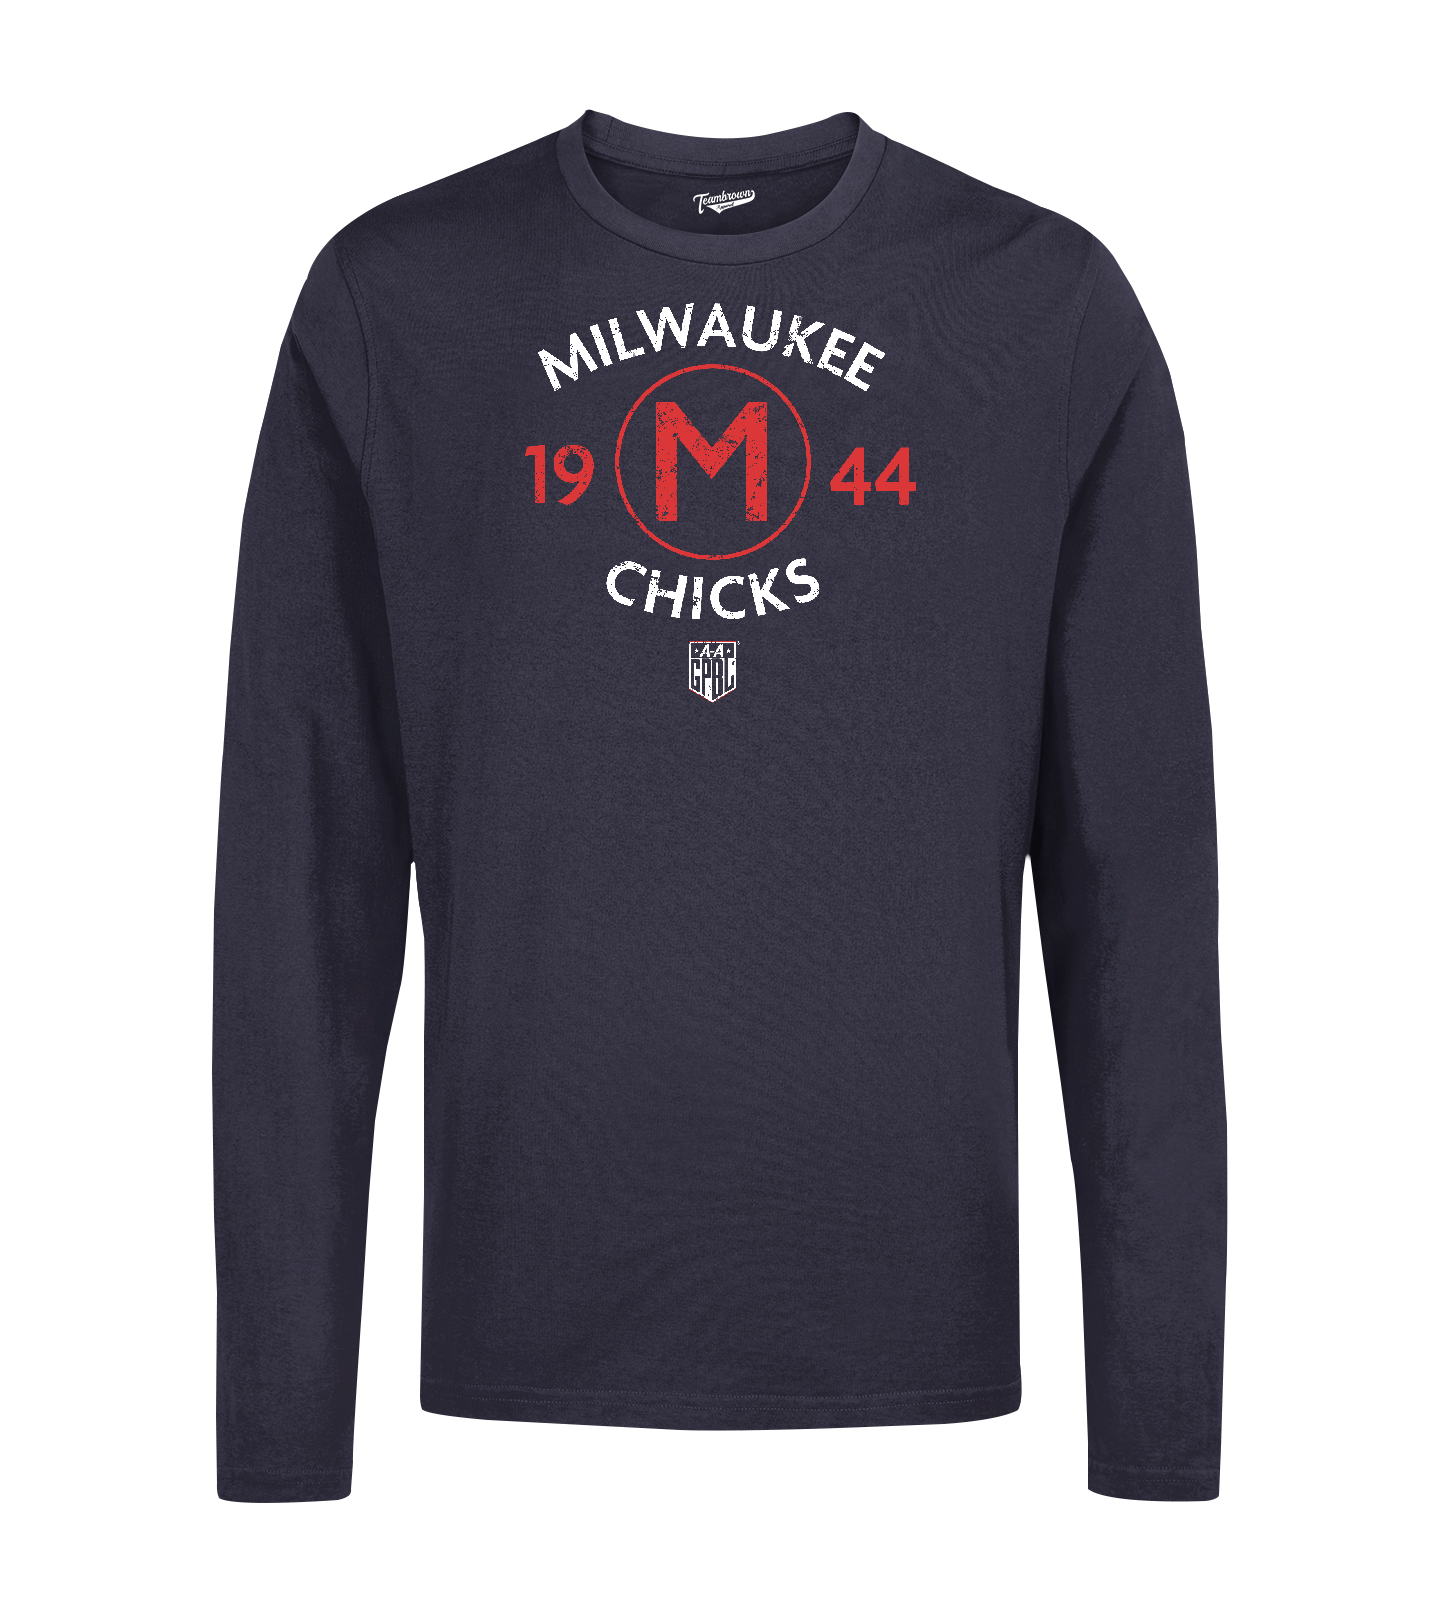 Milwaukee Chicks Champions - Unisex Long Sleeve Crew T-Shirt | Officially Licensed - AAGPBL